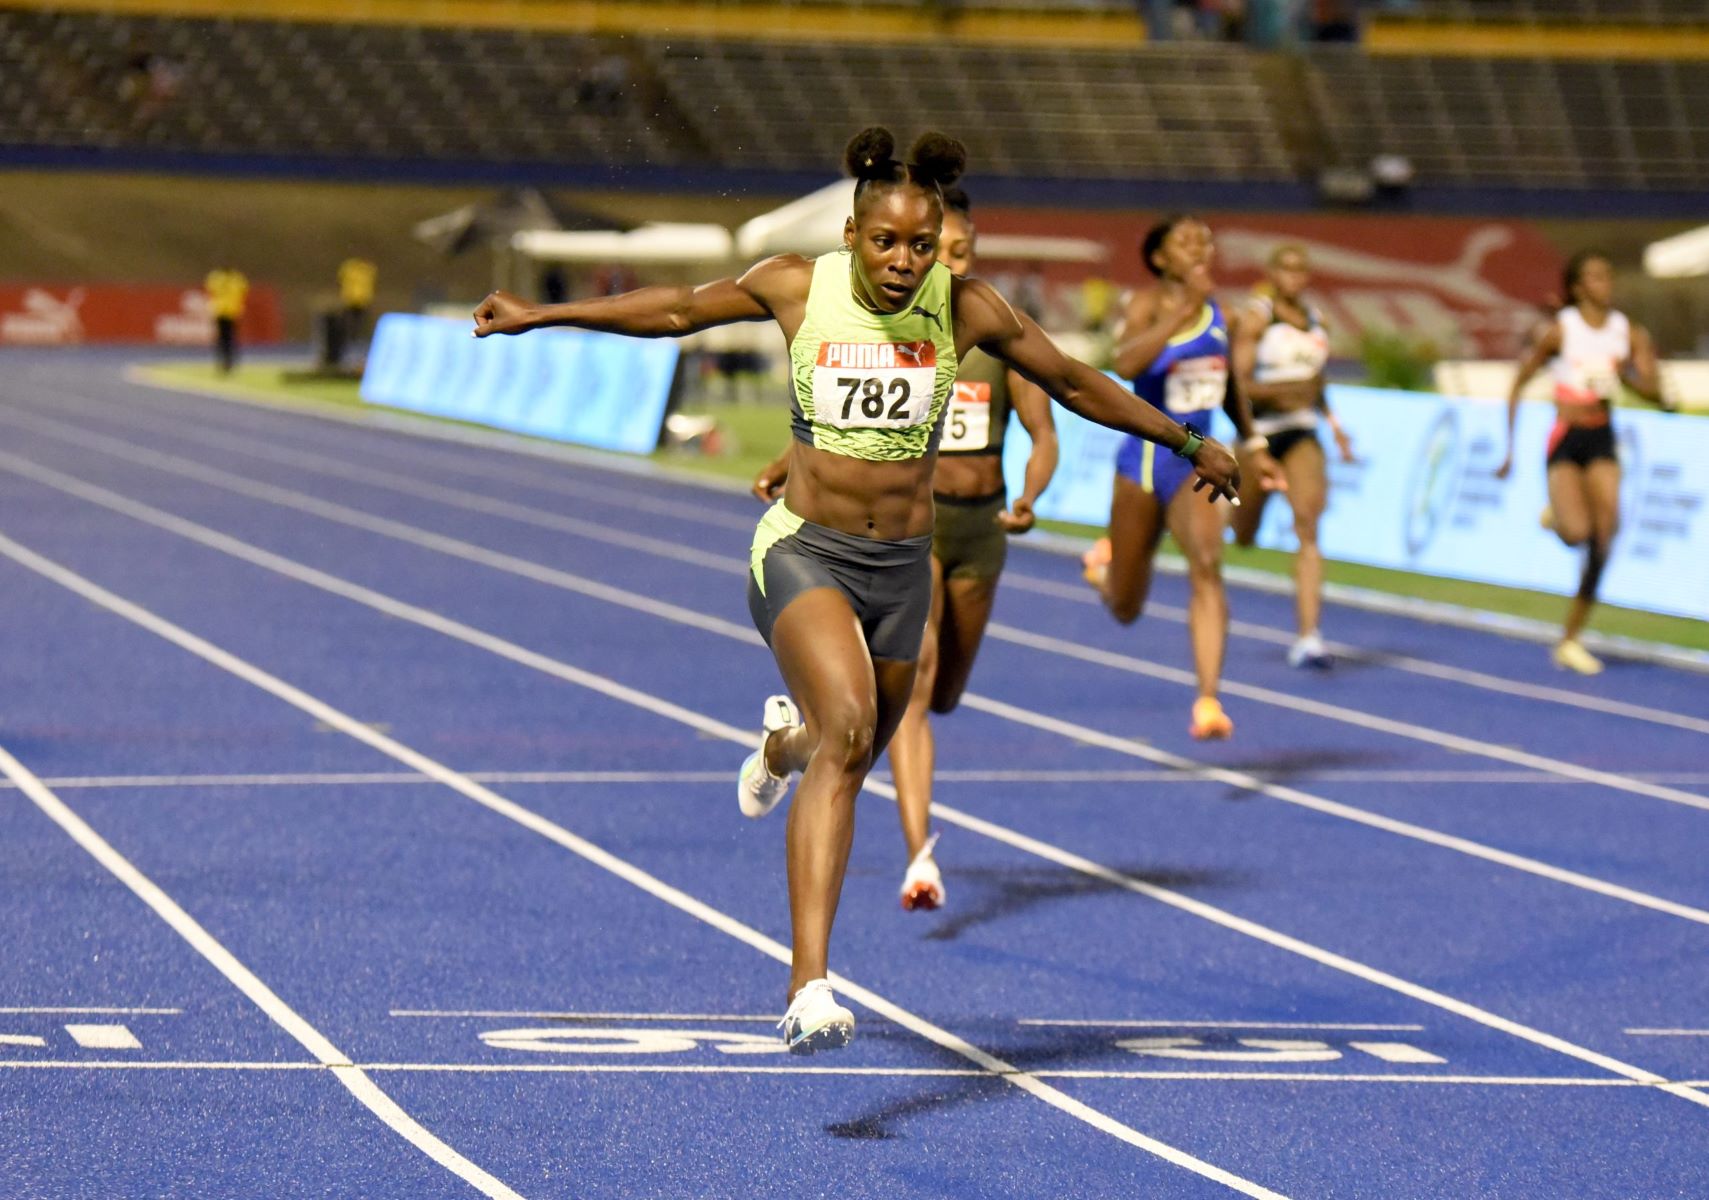 Who Won Womens 200M Track And Field?